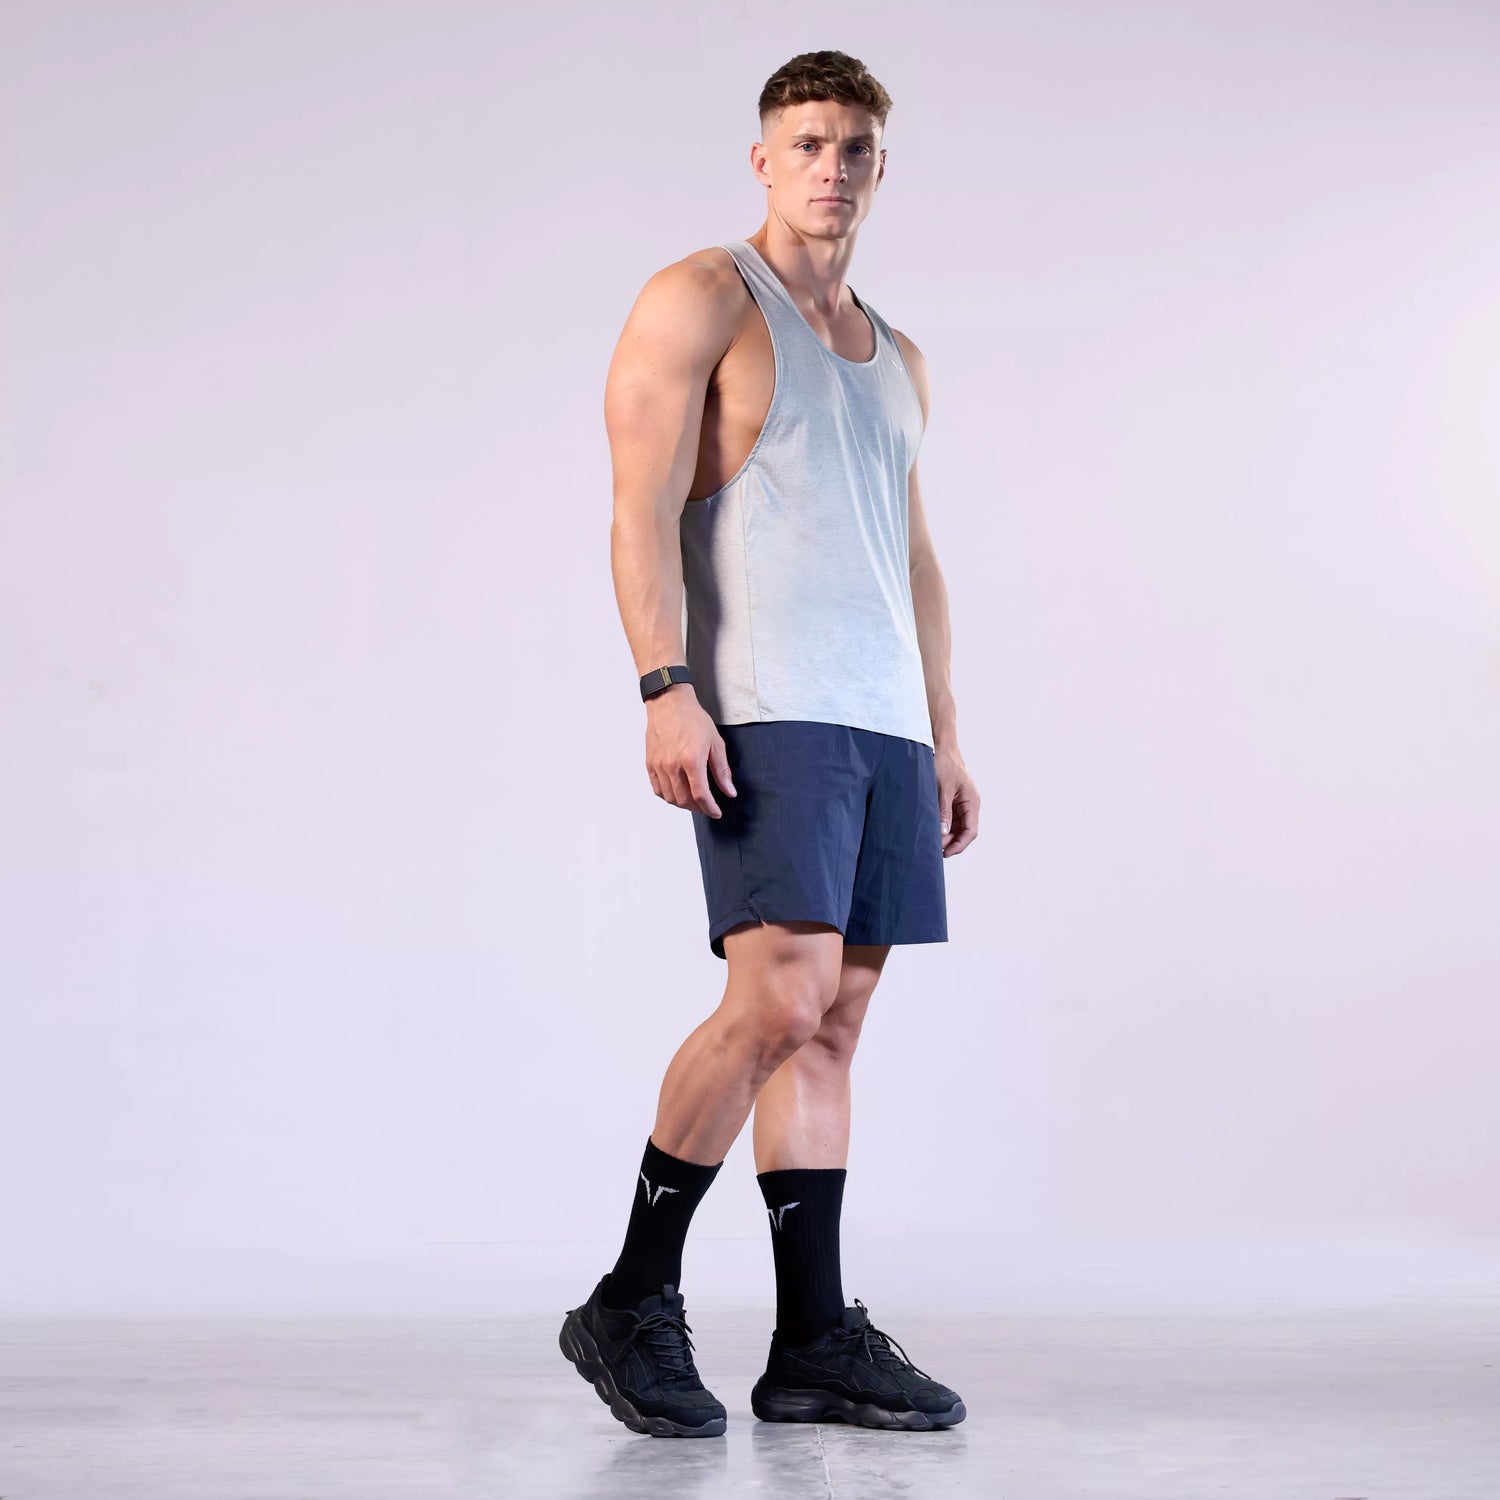 squatwolf-gym-wear-pack-of-3-core-crew-socks-onyx-workout